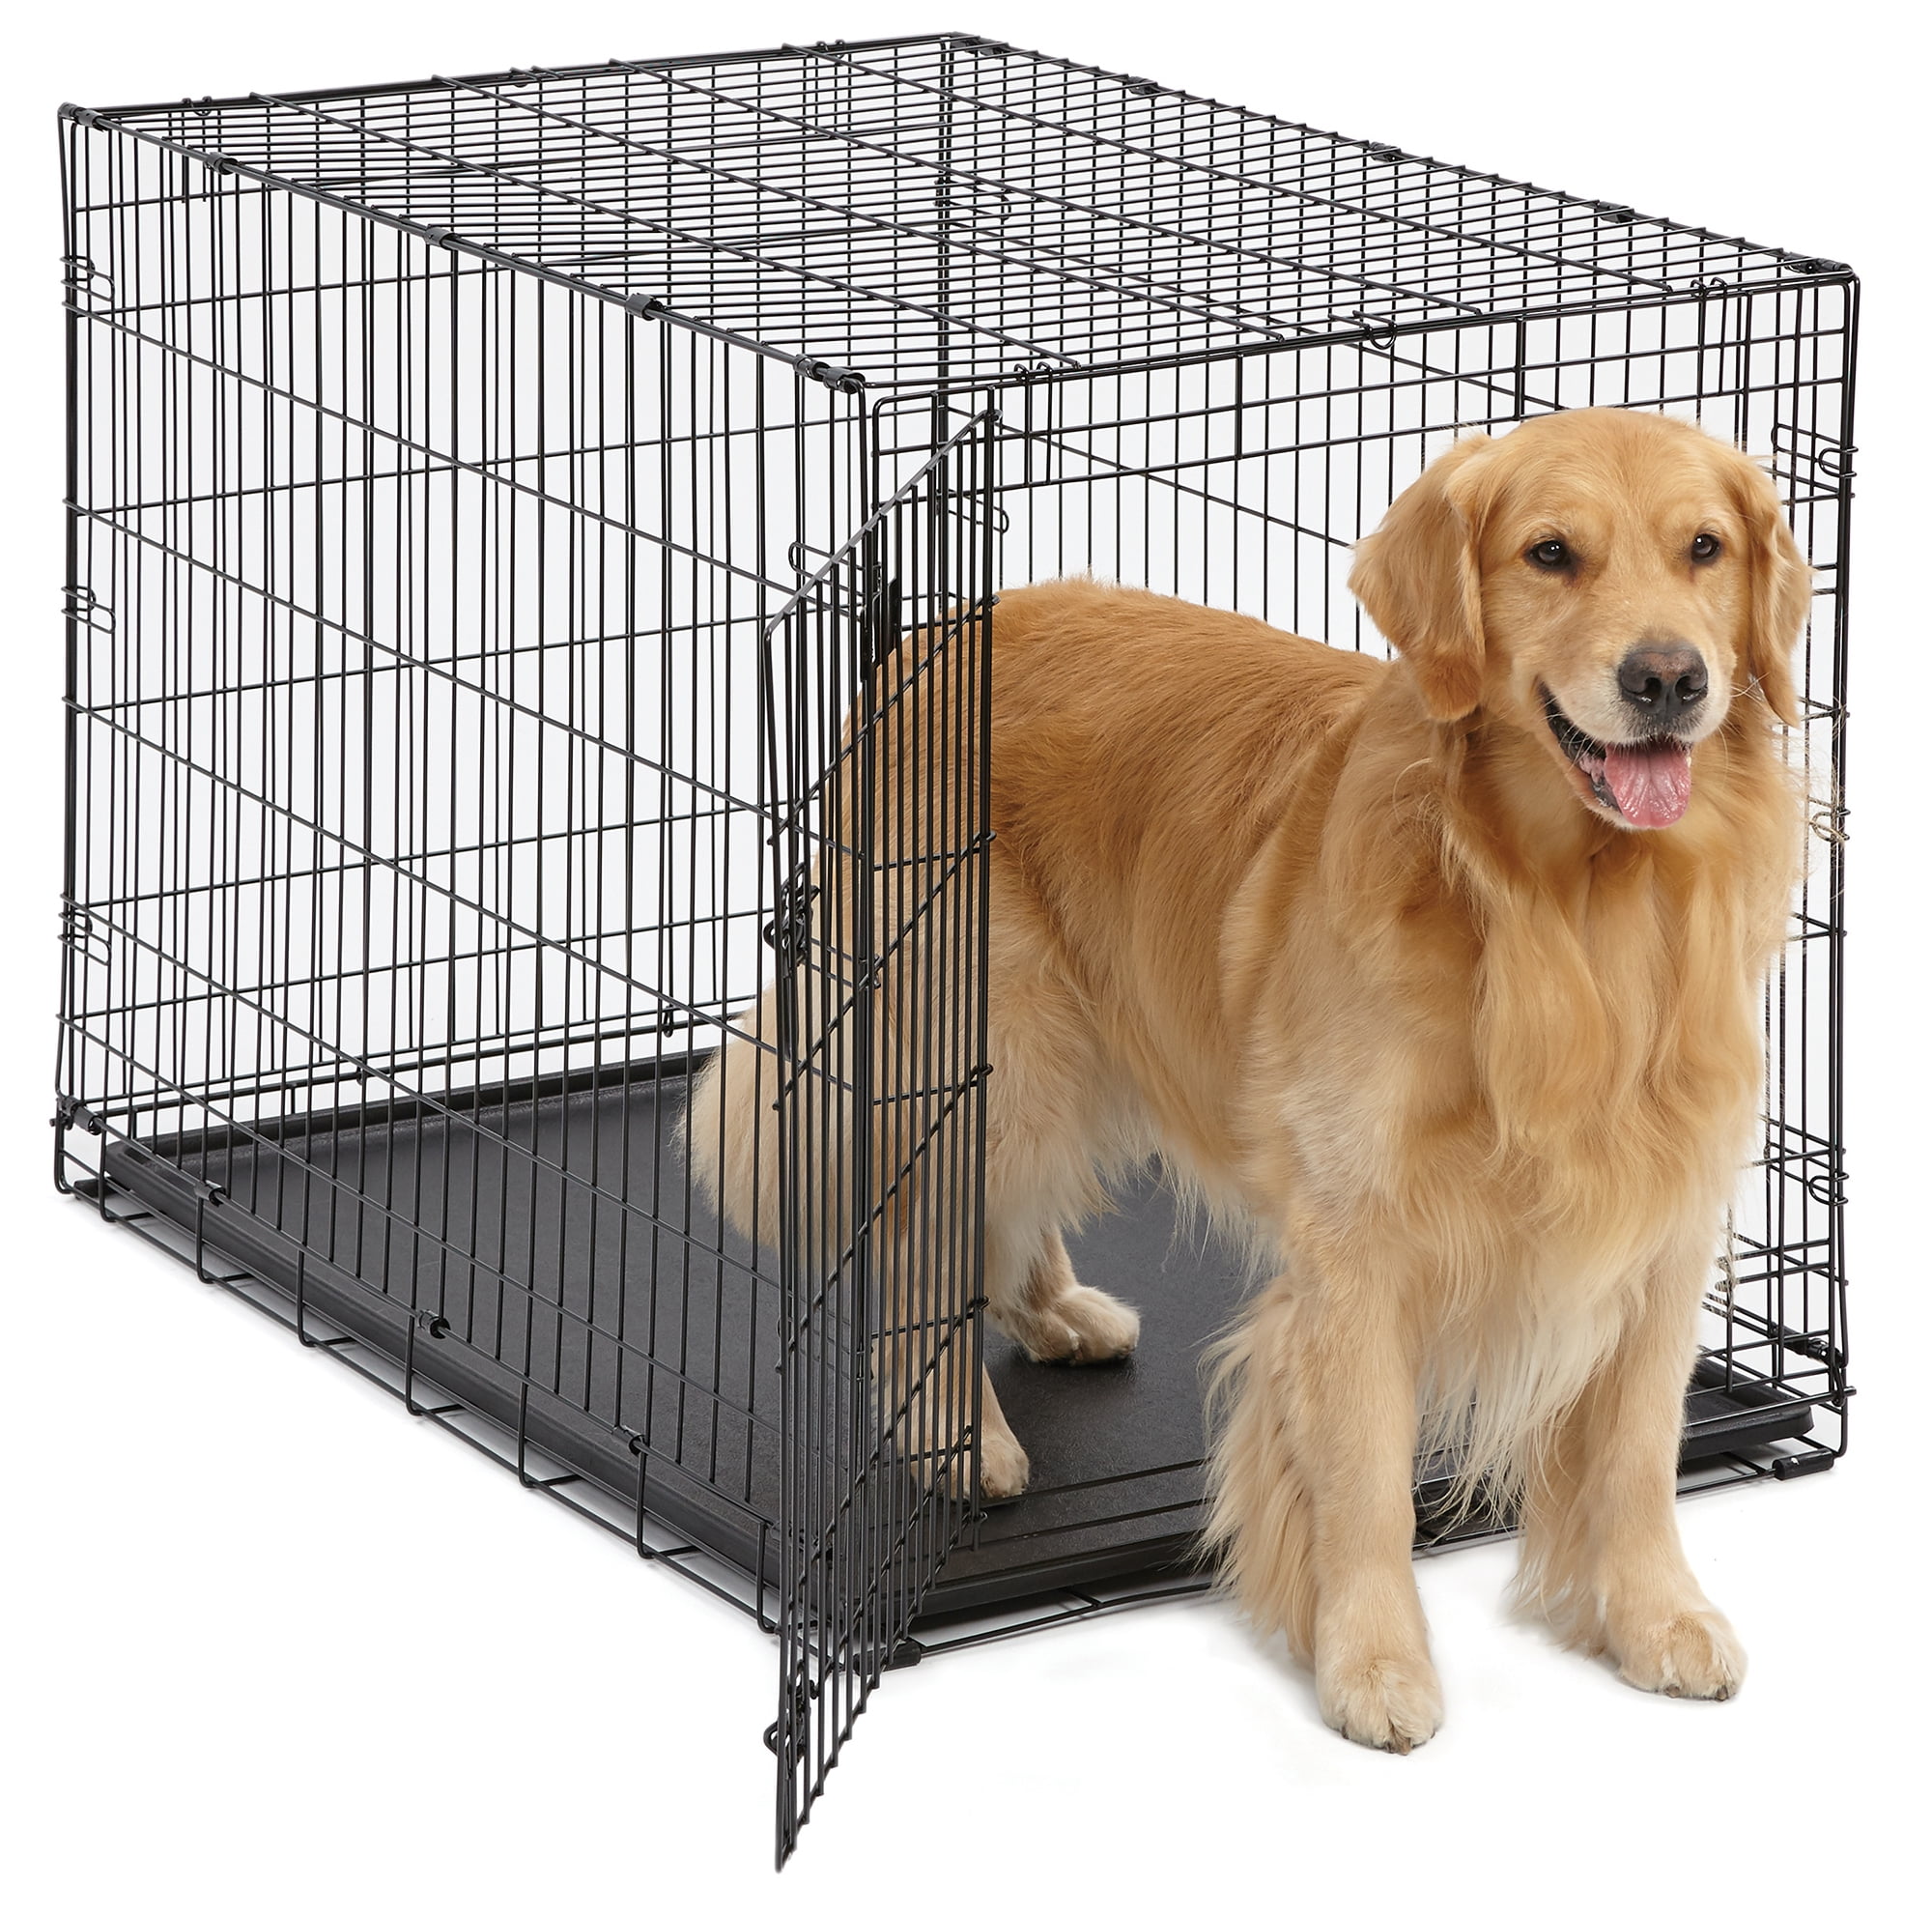 Photo 1 of (DAMAGED)MidWest iCrate Fold & Carry Single Door Collapsible Wire Dog Crate, 42 inch
**BENT**